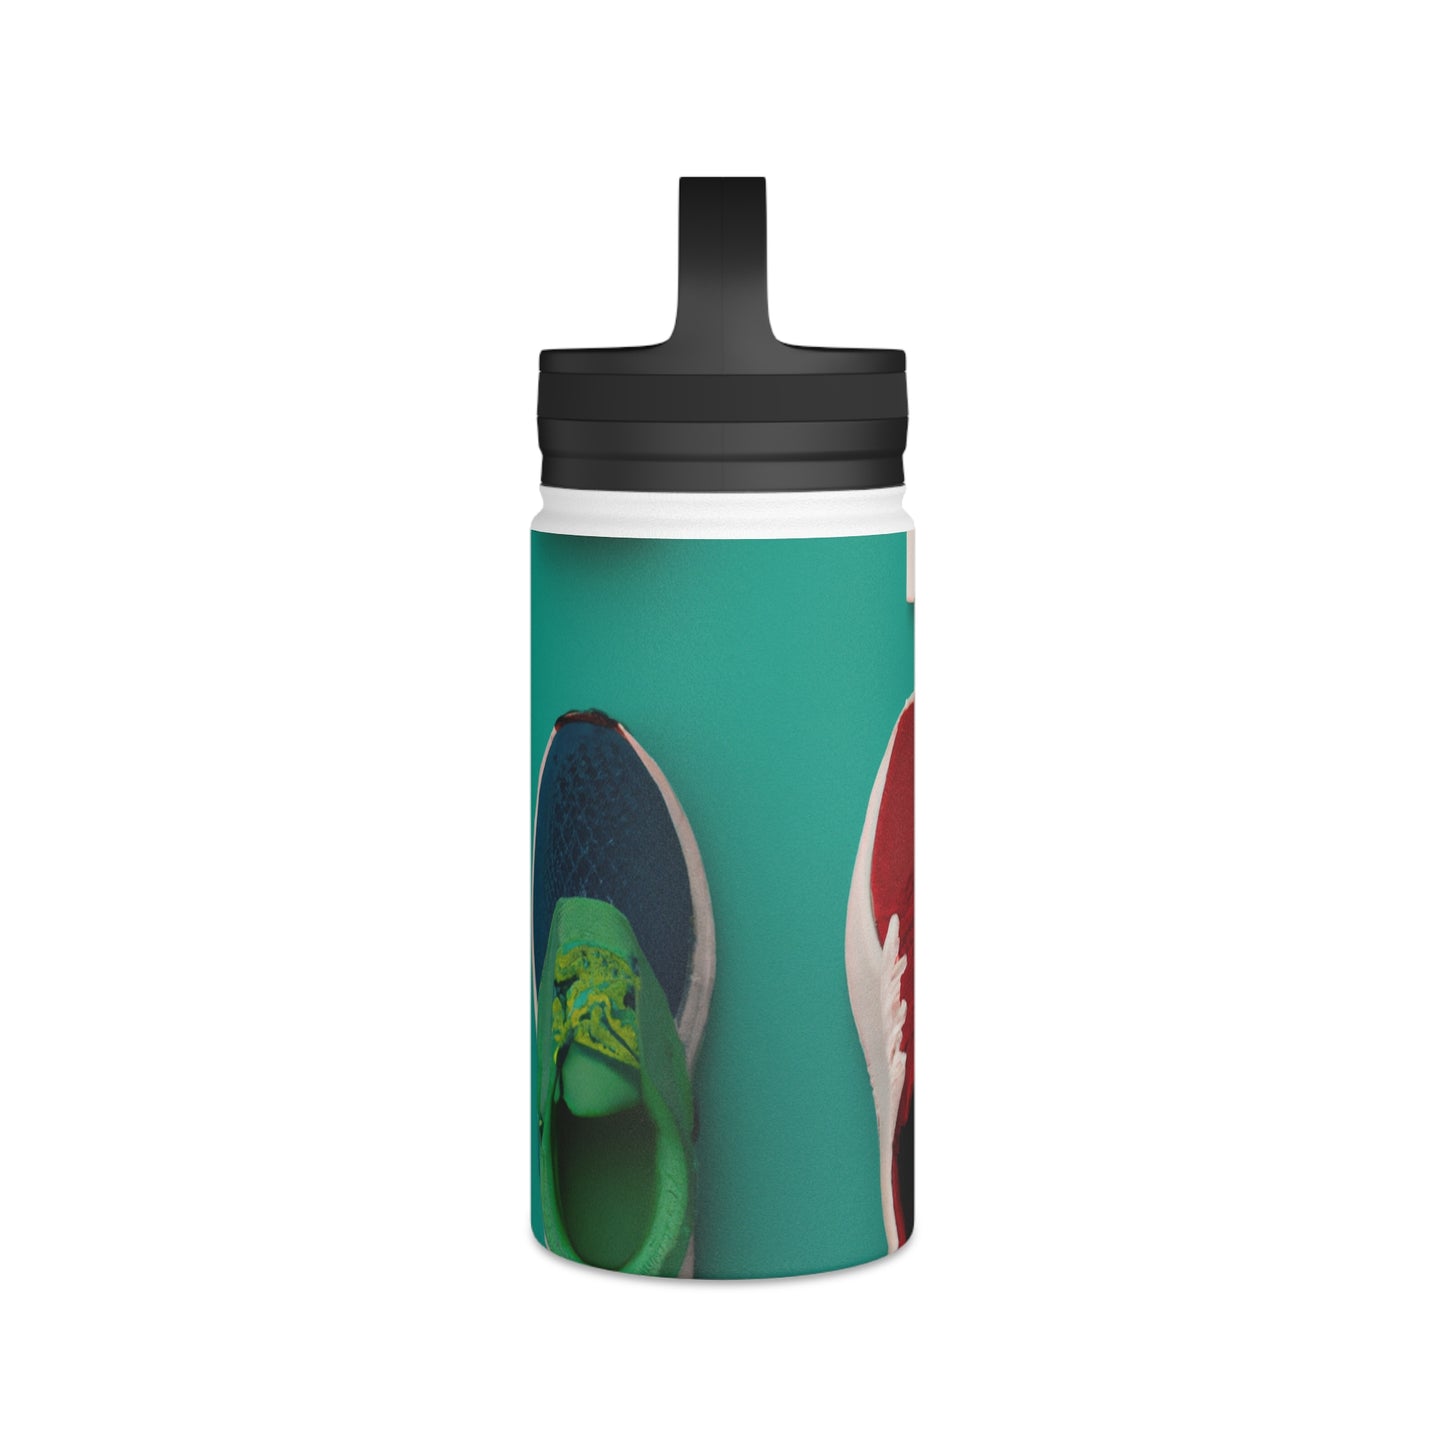 "The Athletic Artistry of Sport" - Go Plus Stainless Steel Water Bottle, Handle Lid